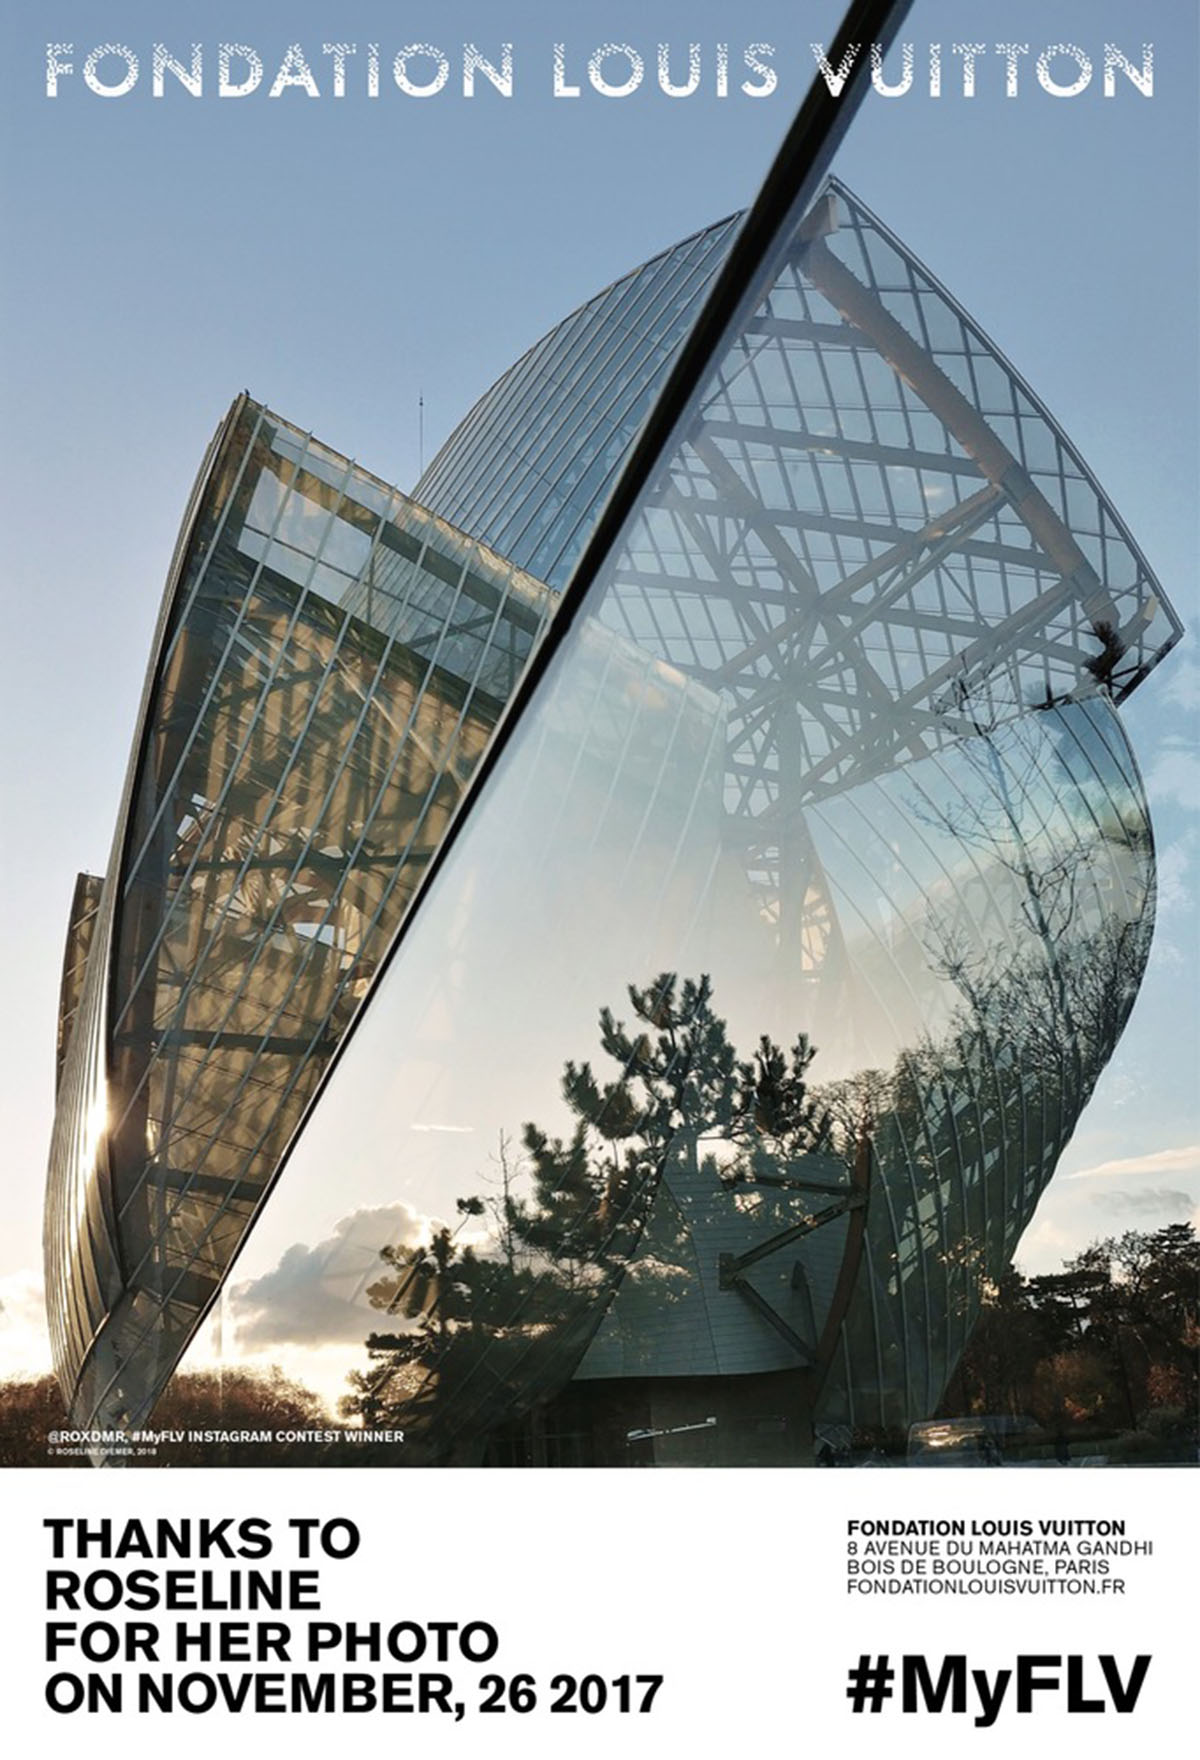 Gallery of Frank Gehry's Fondation Louis Vuitton / Images by